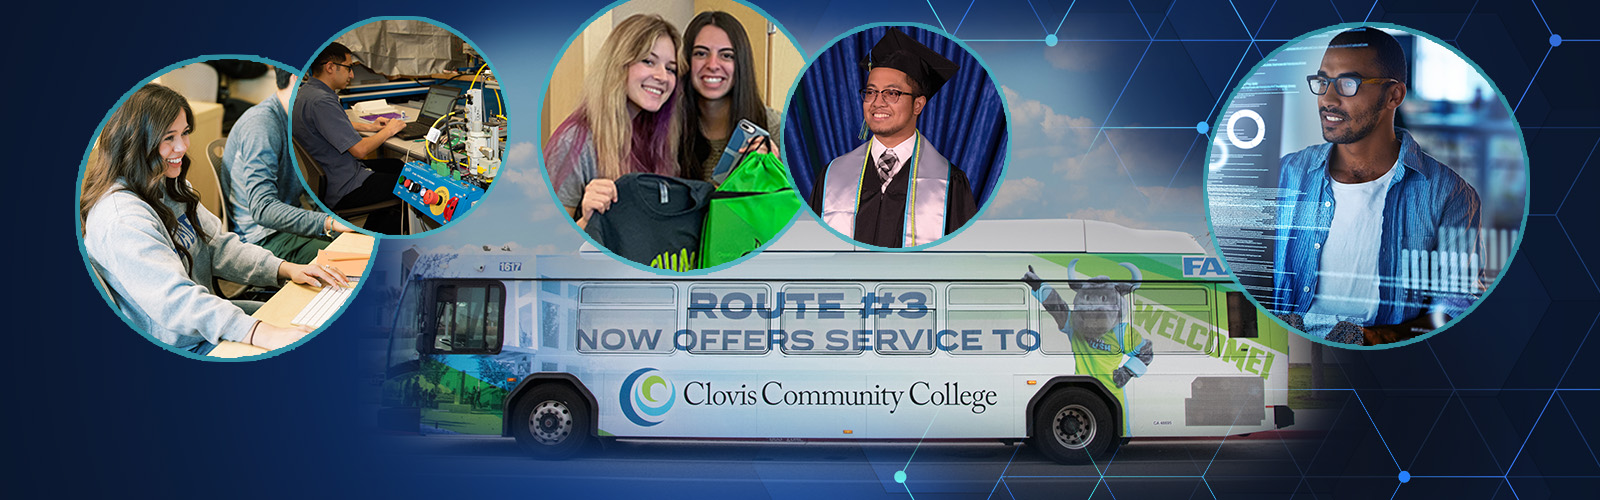 a collage of images of students at Clovis Community College including a photograph of the new FAX bus